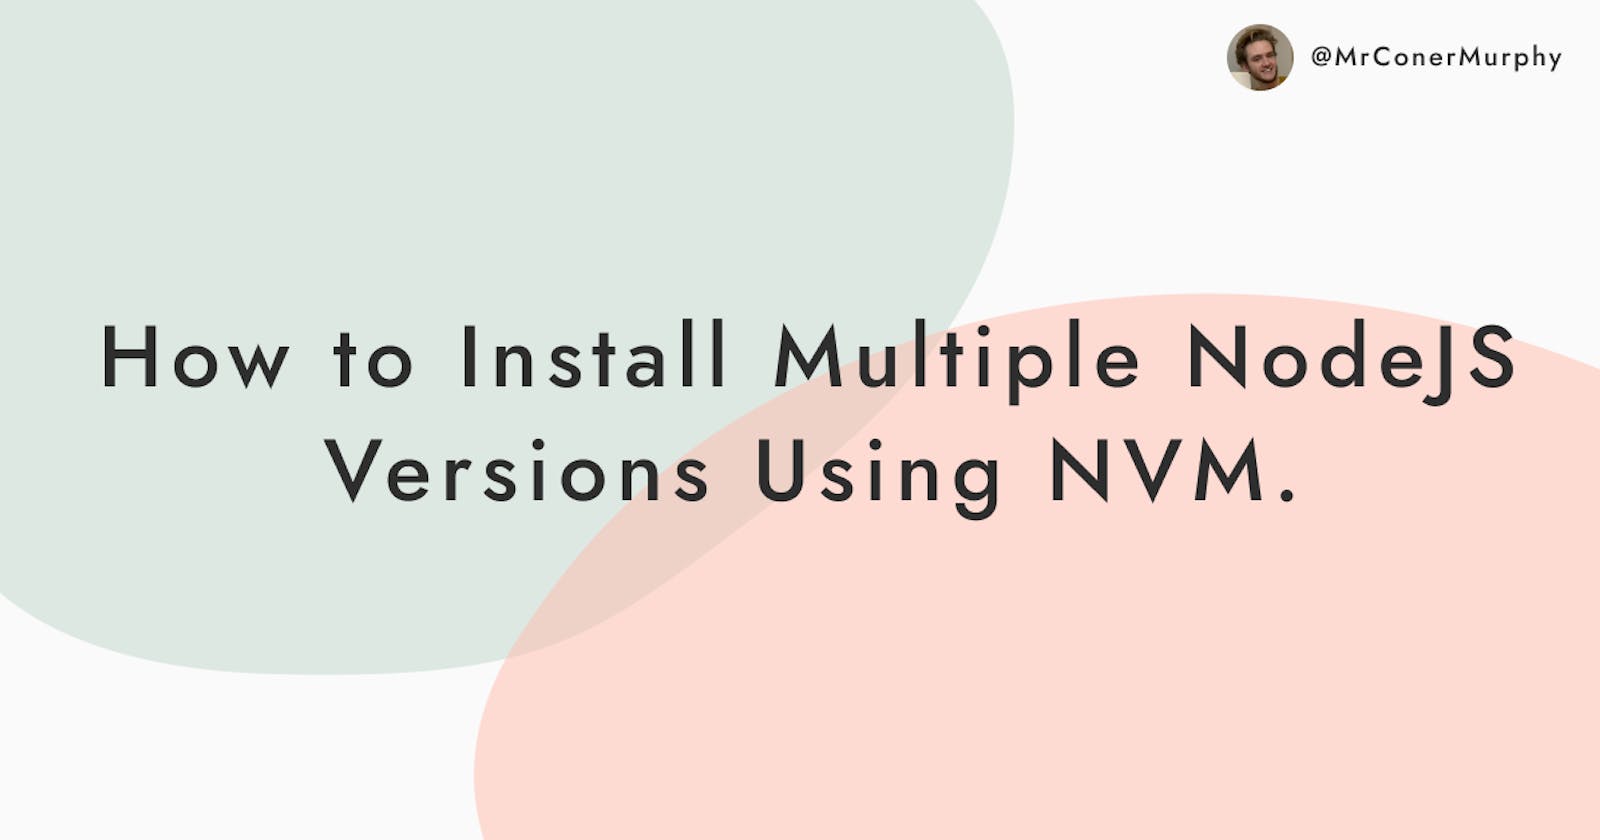 How to Install Multiple NodeJS Versions Using NVM.